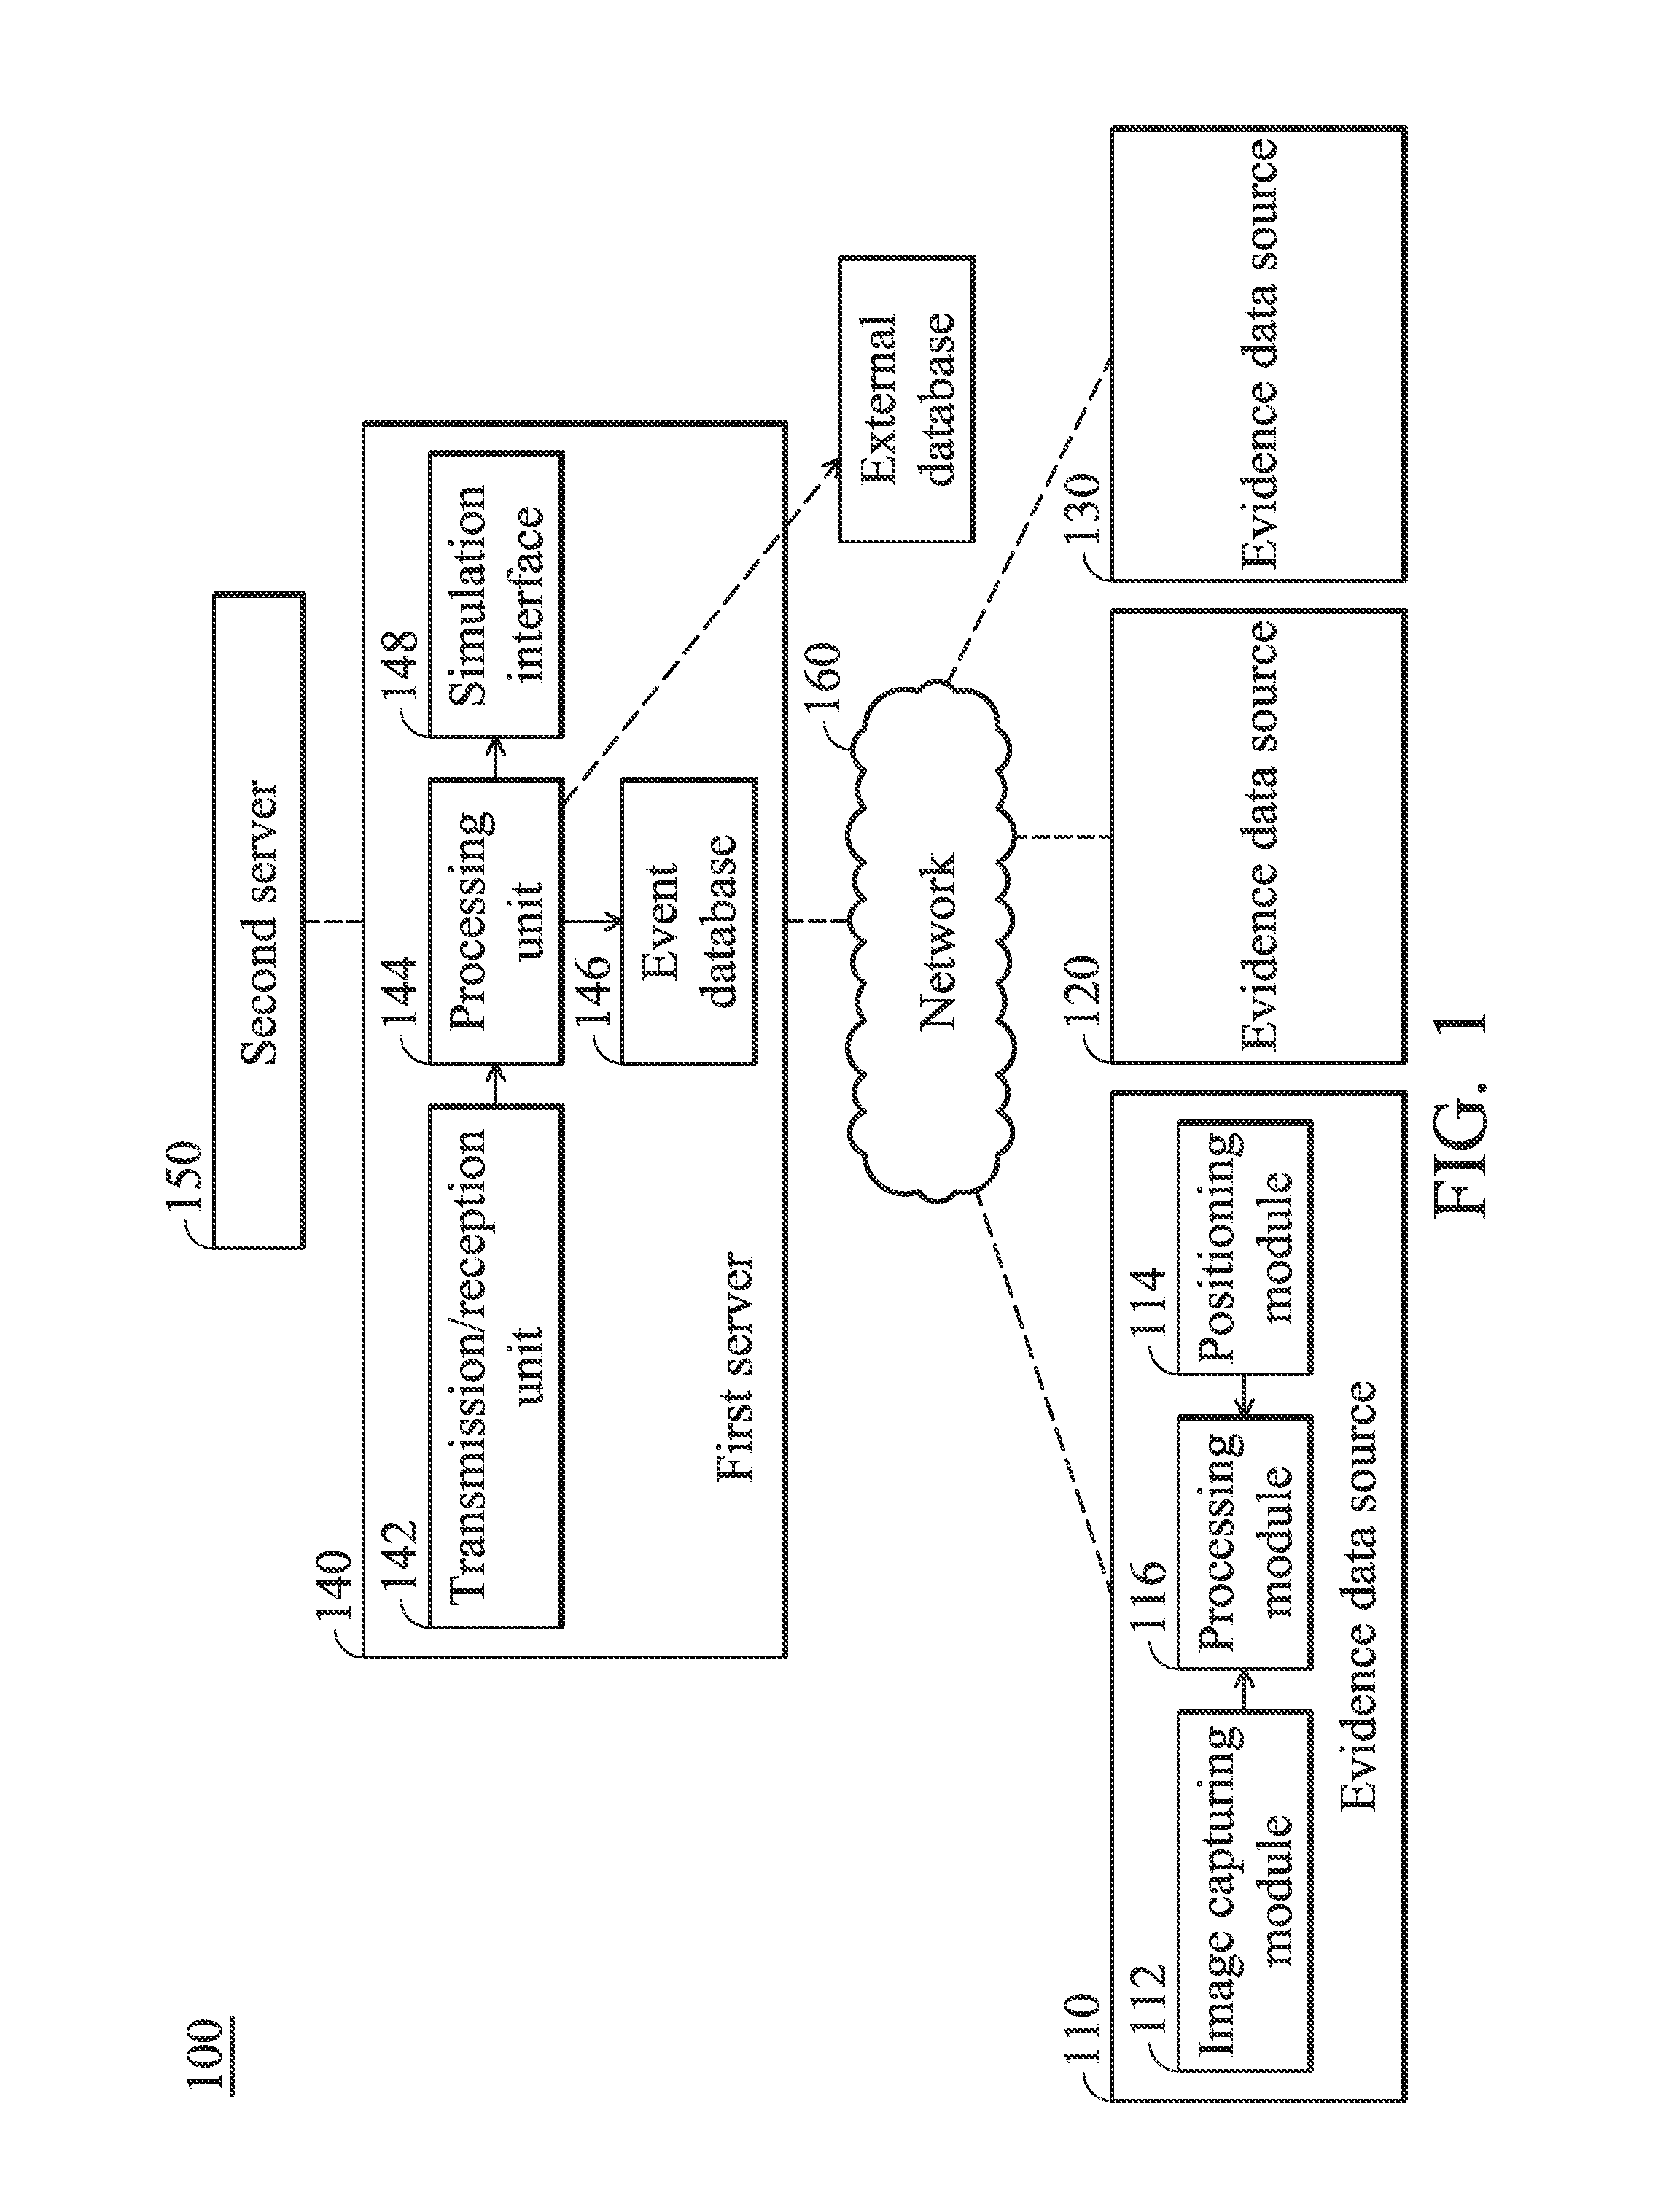 Accident information aggregation and management systems and methods for accident information aggregation and management thereof